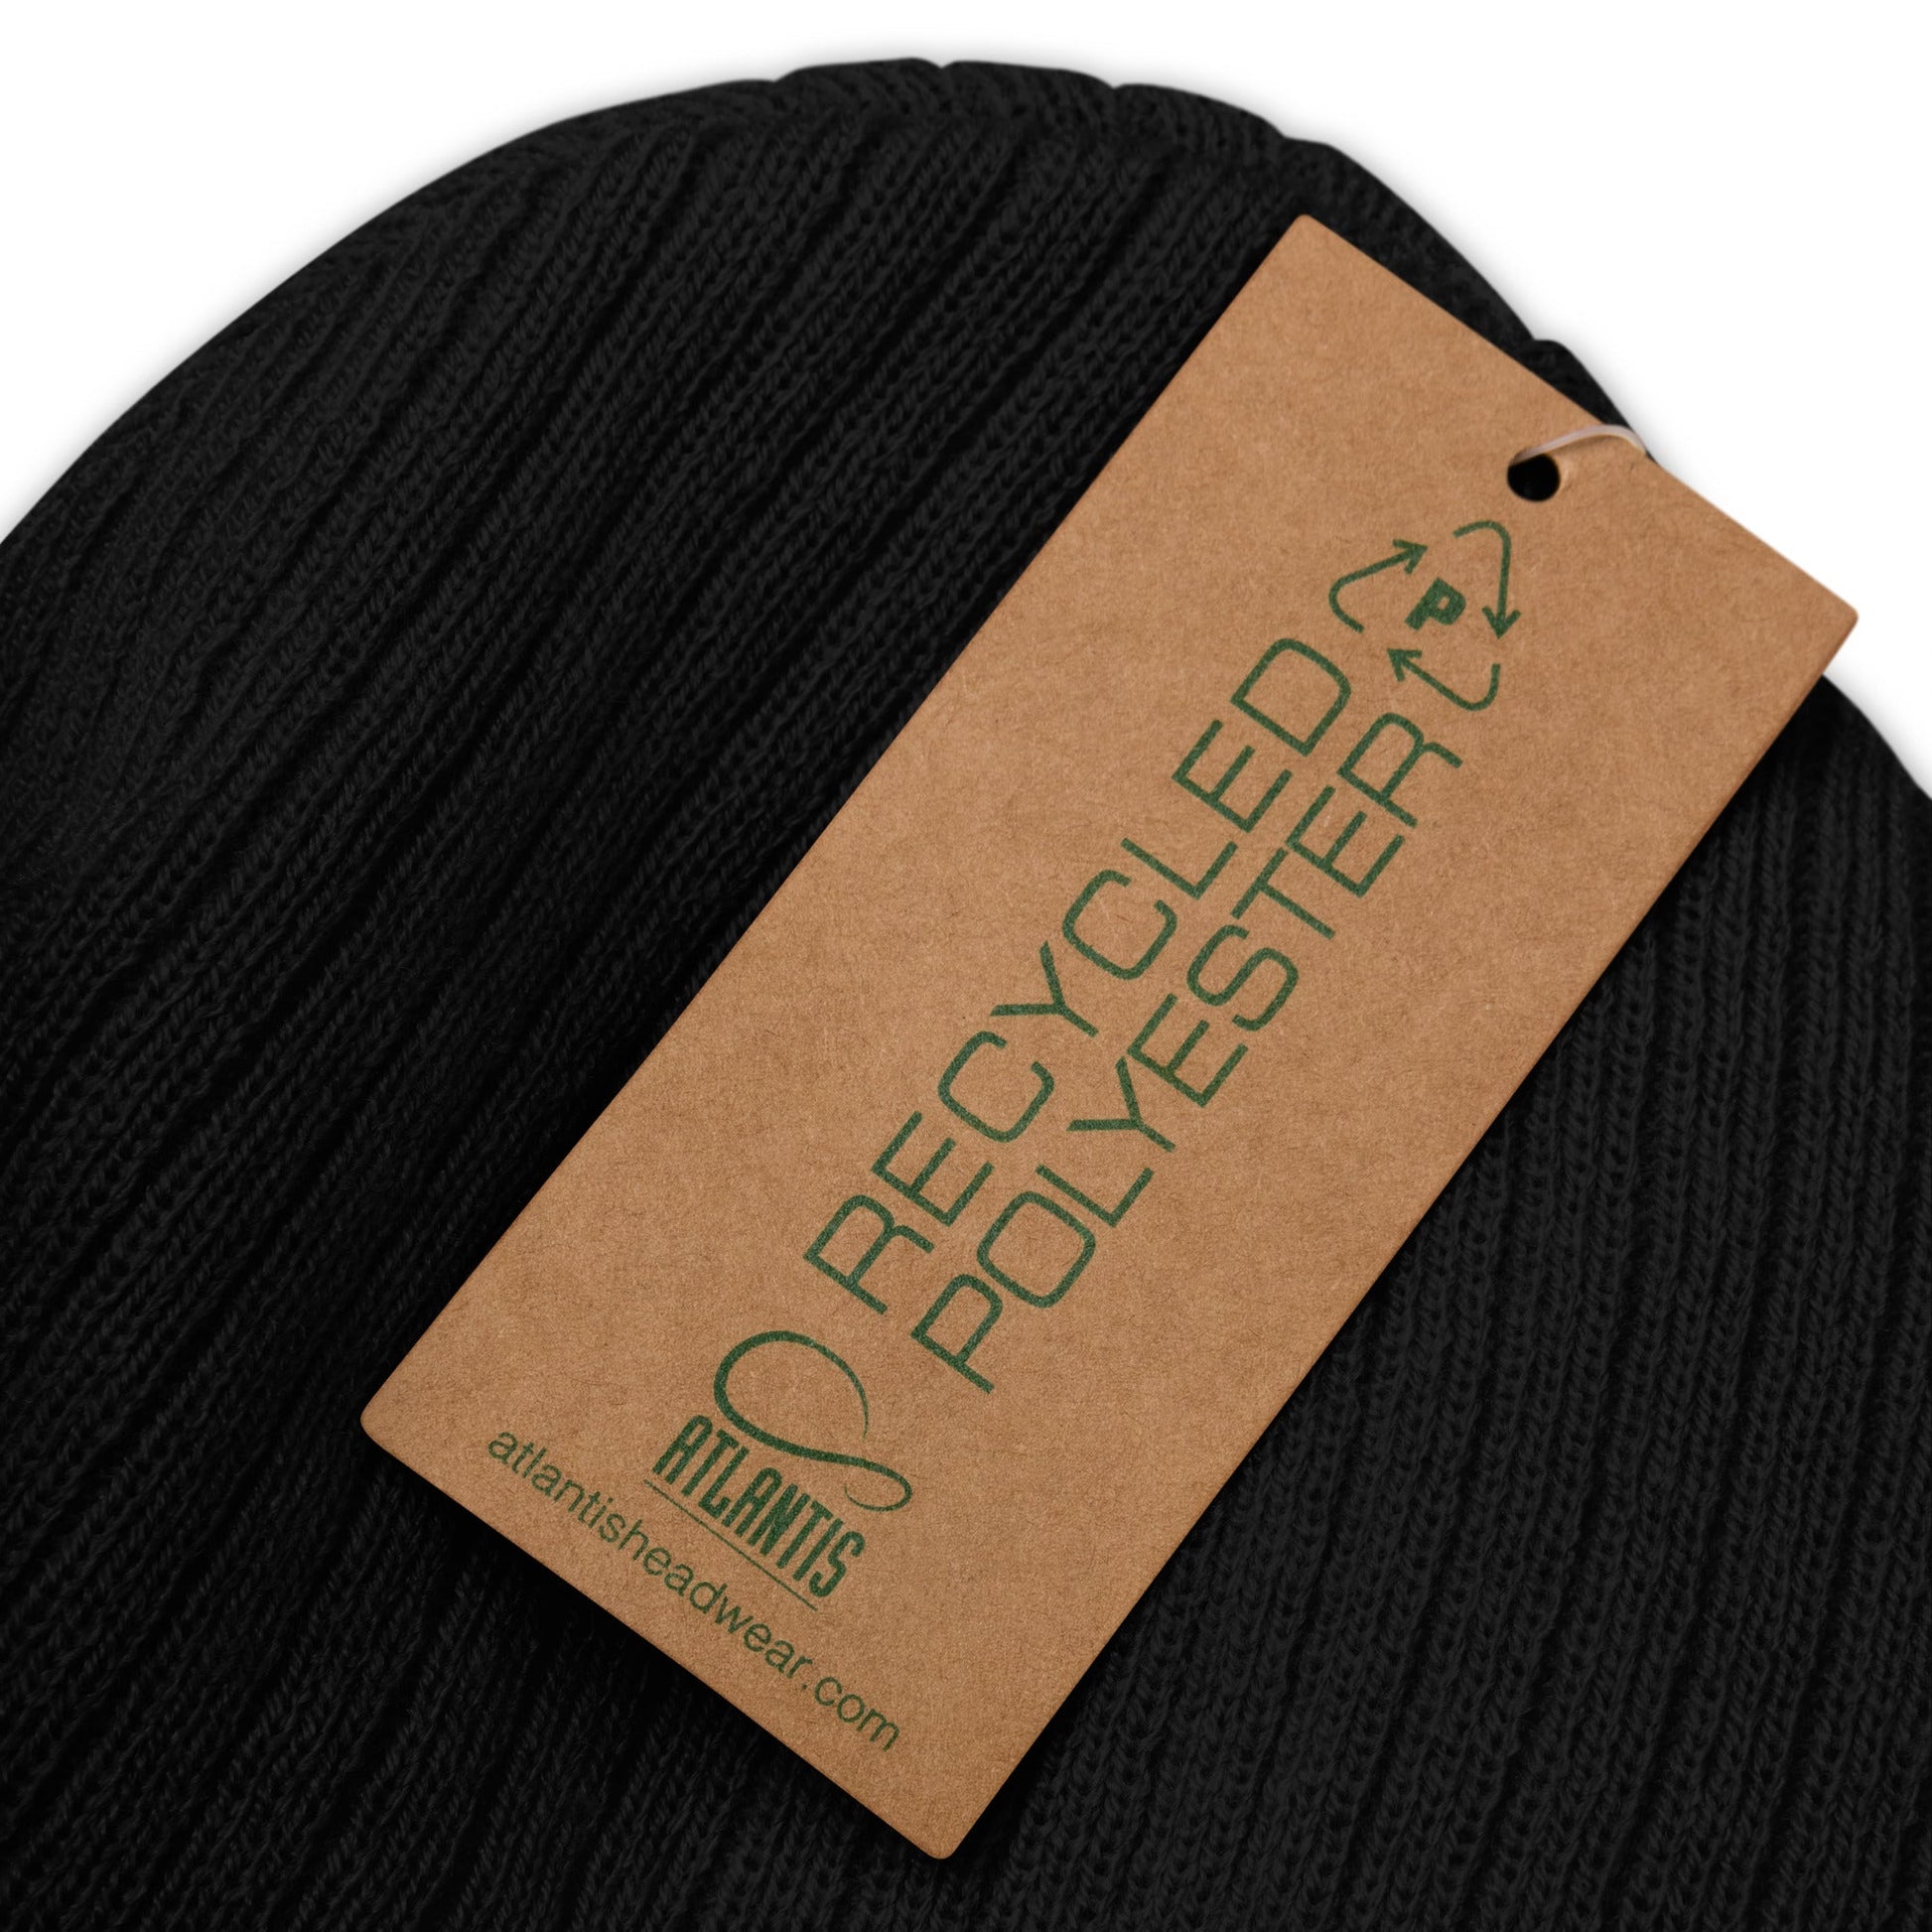 Ribbed knit beanie with Big Dog Slogan - Hobbster